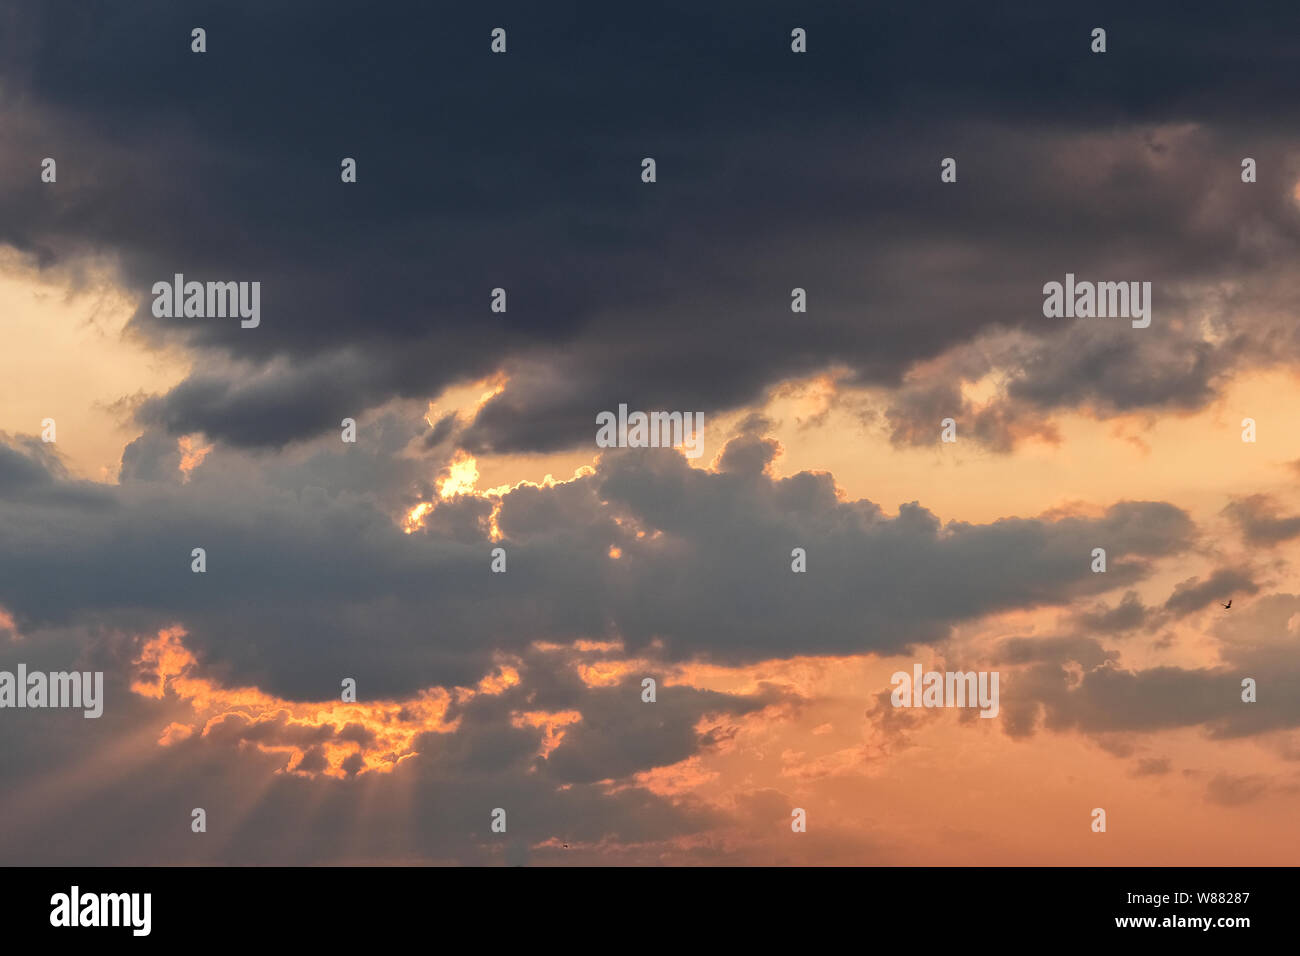 Sunset with black and grey clouds and silhouette of bird Stock Photo